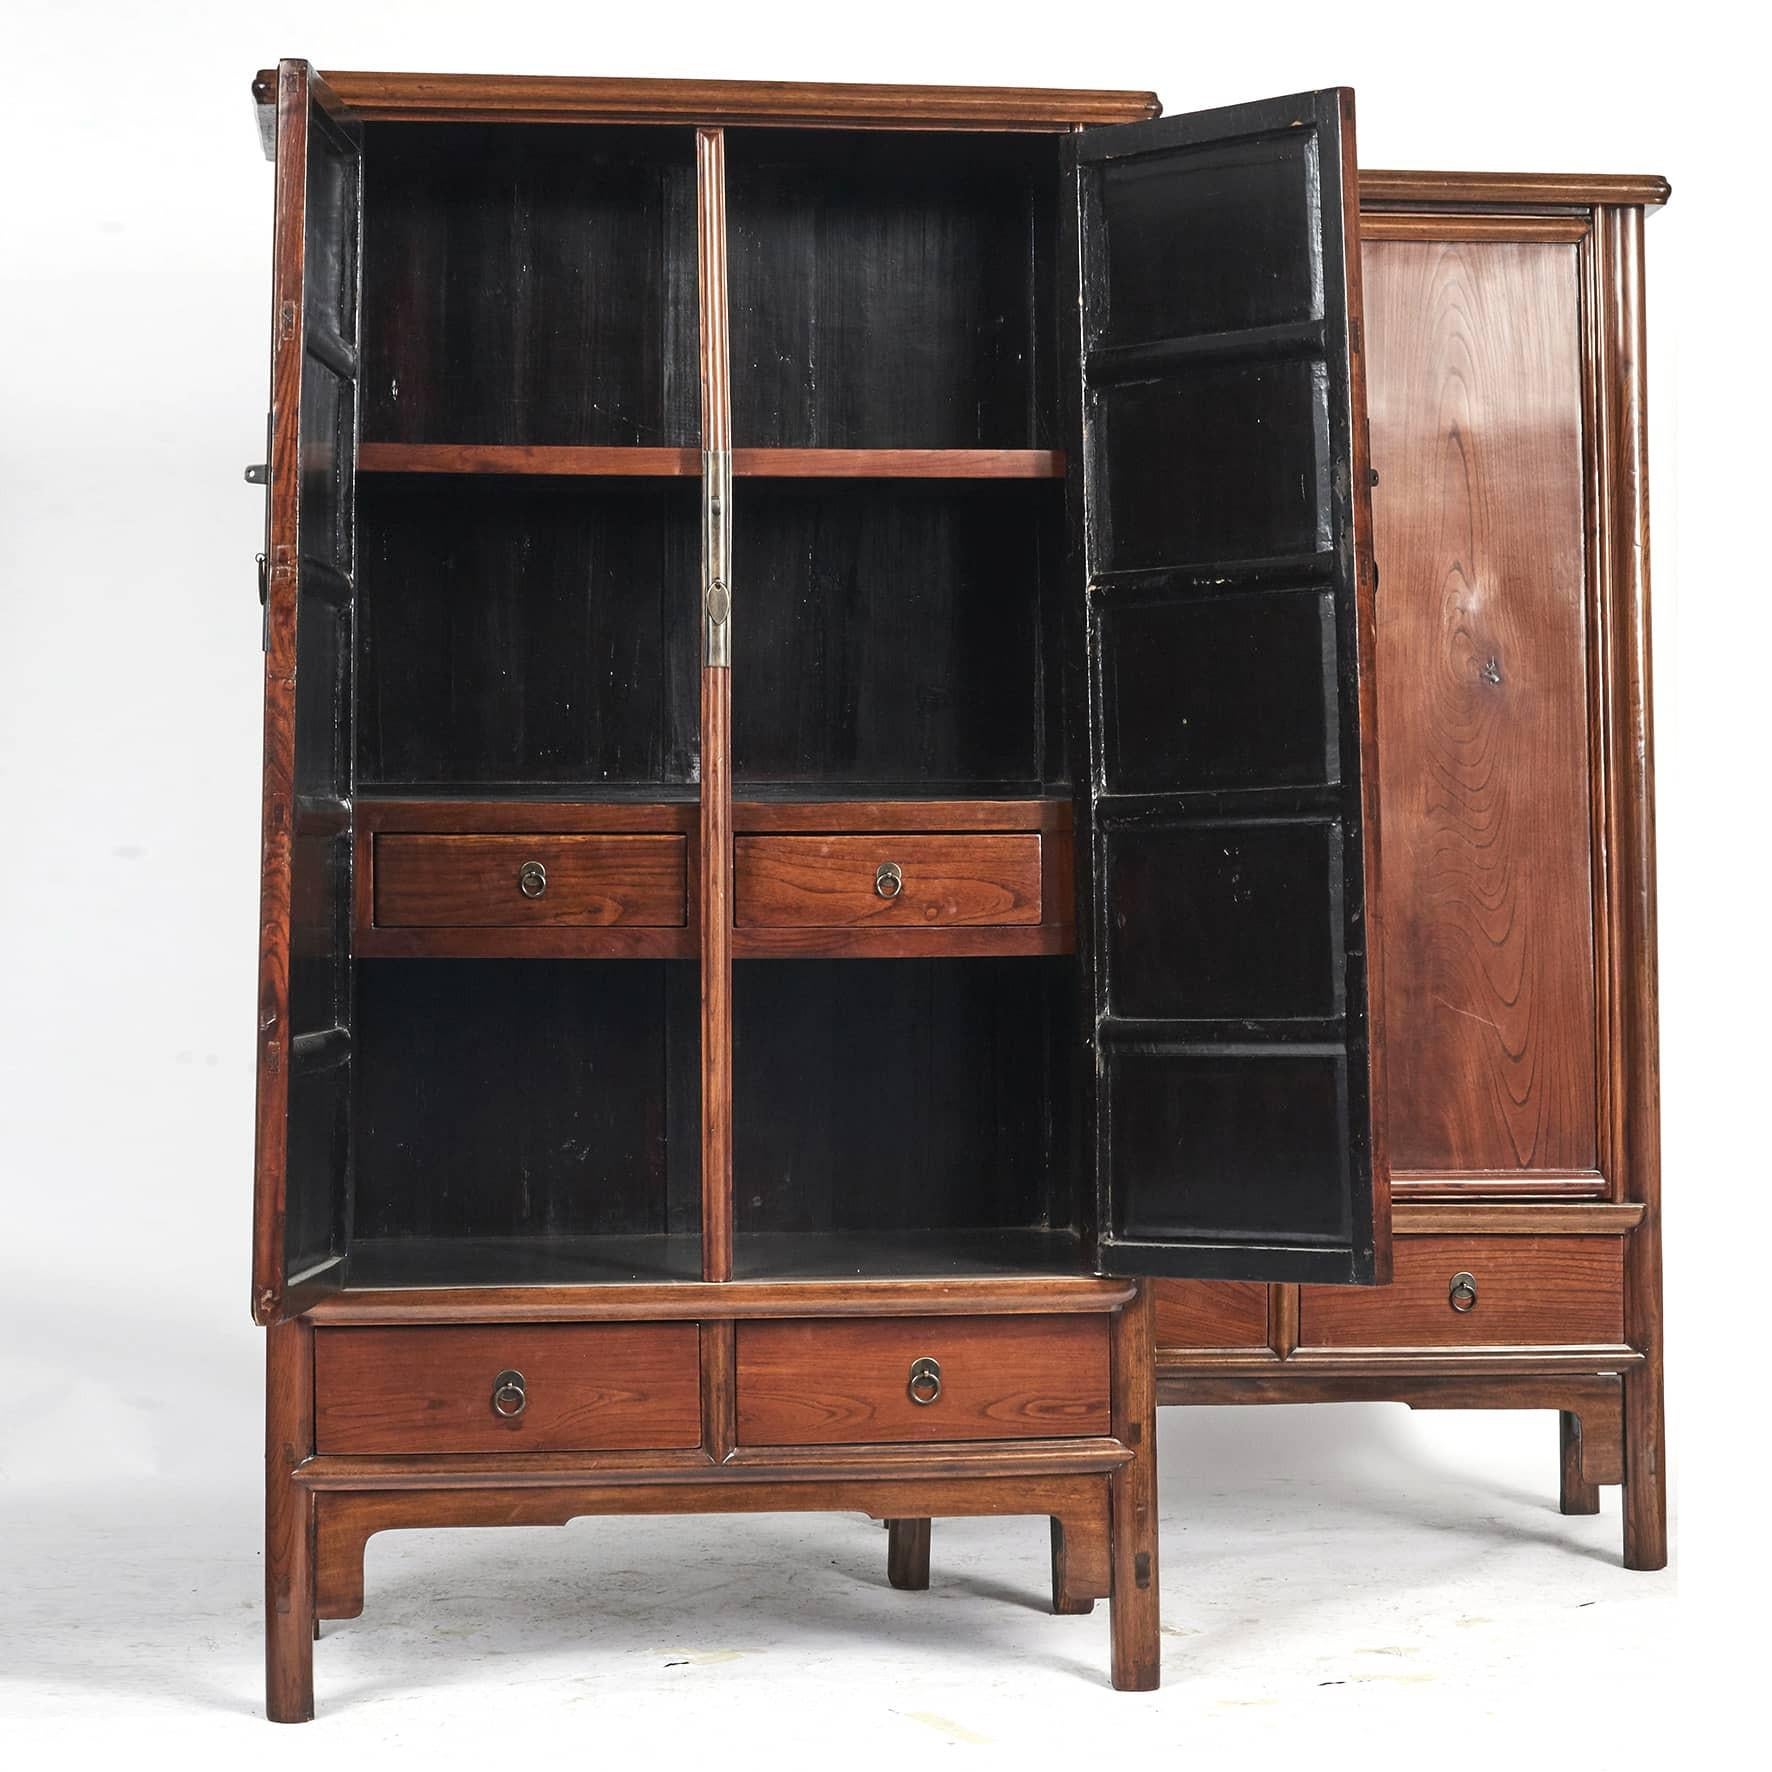 Pair of cabinets in Ming style, early 19th century.

Made in the beautiful wood Jumu, also called southern elm (Looks some what like walnut wood in its structure and veining). Found only in China.
Furniture in Jumu wood is in great demand today,